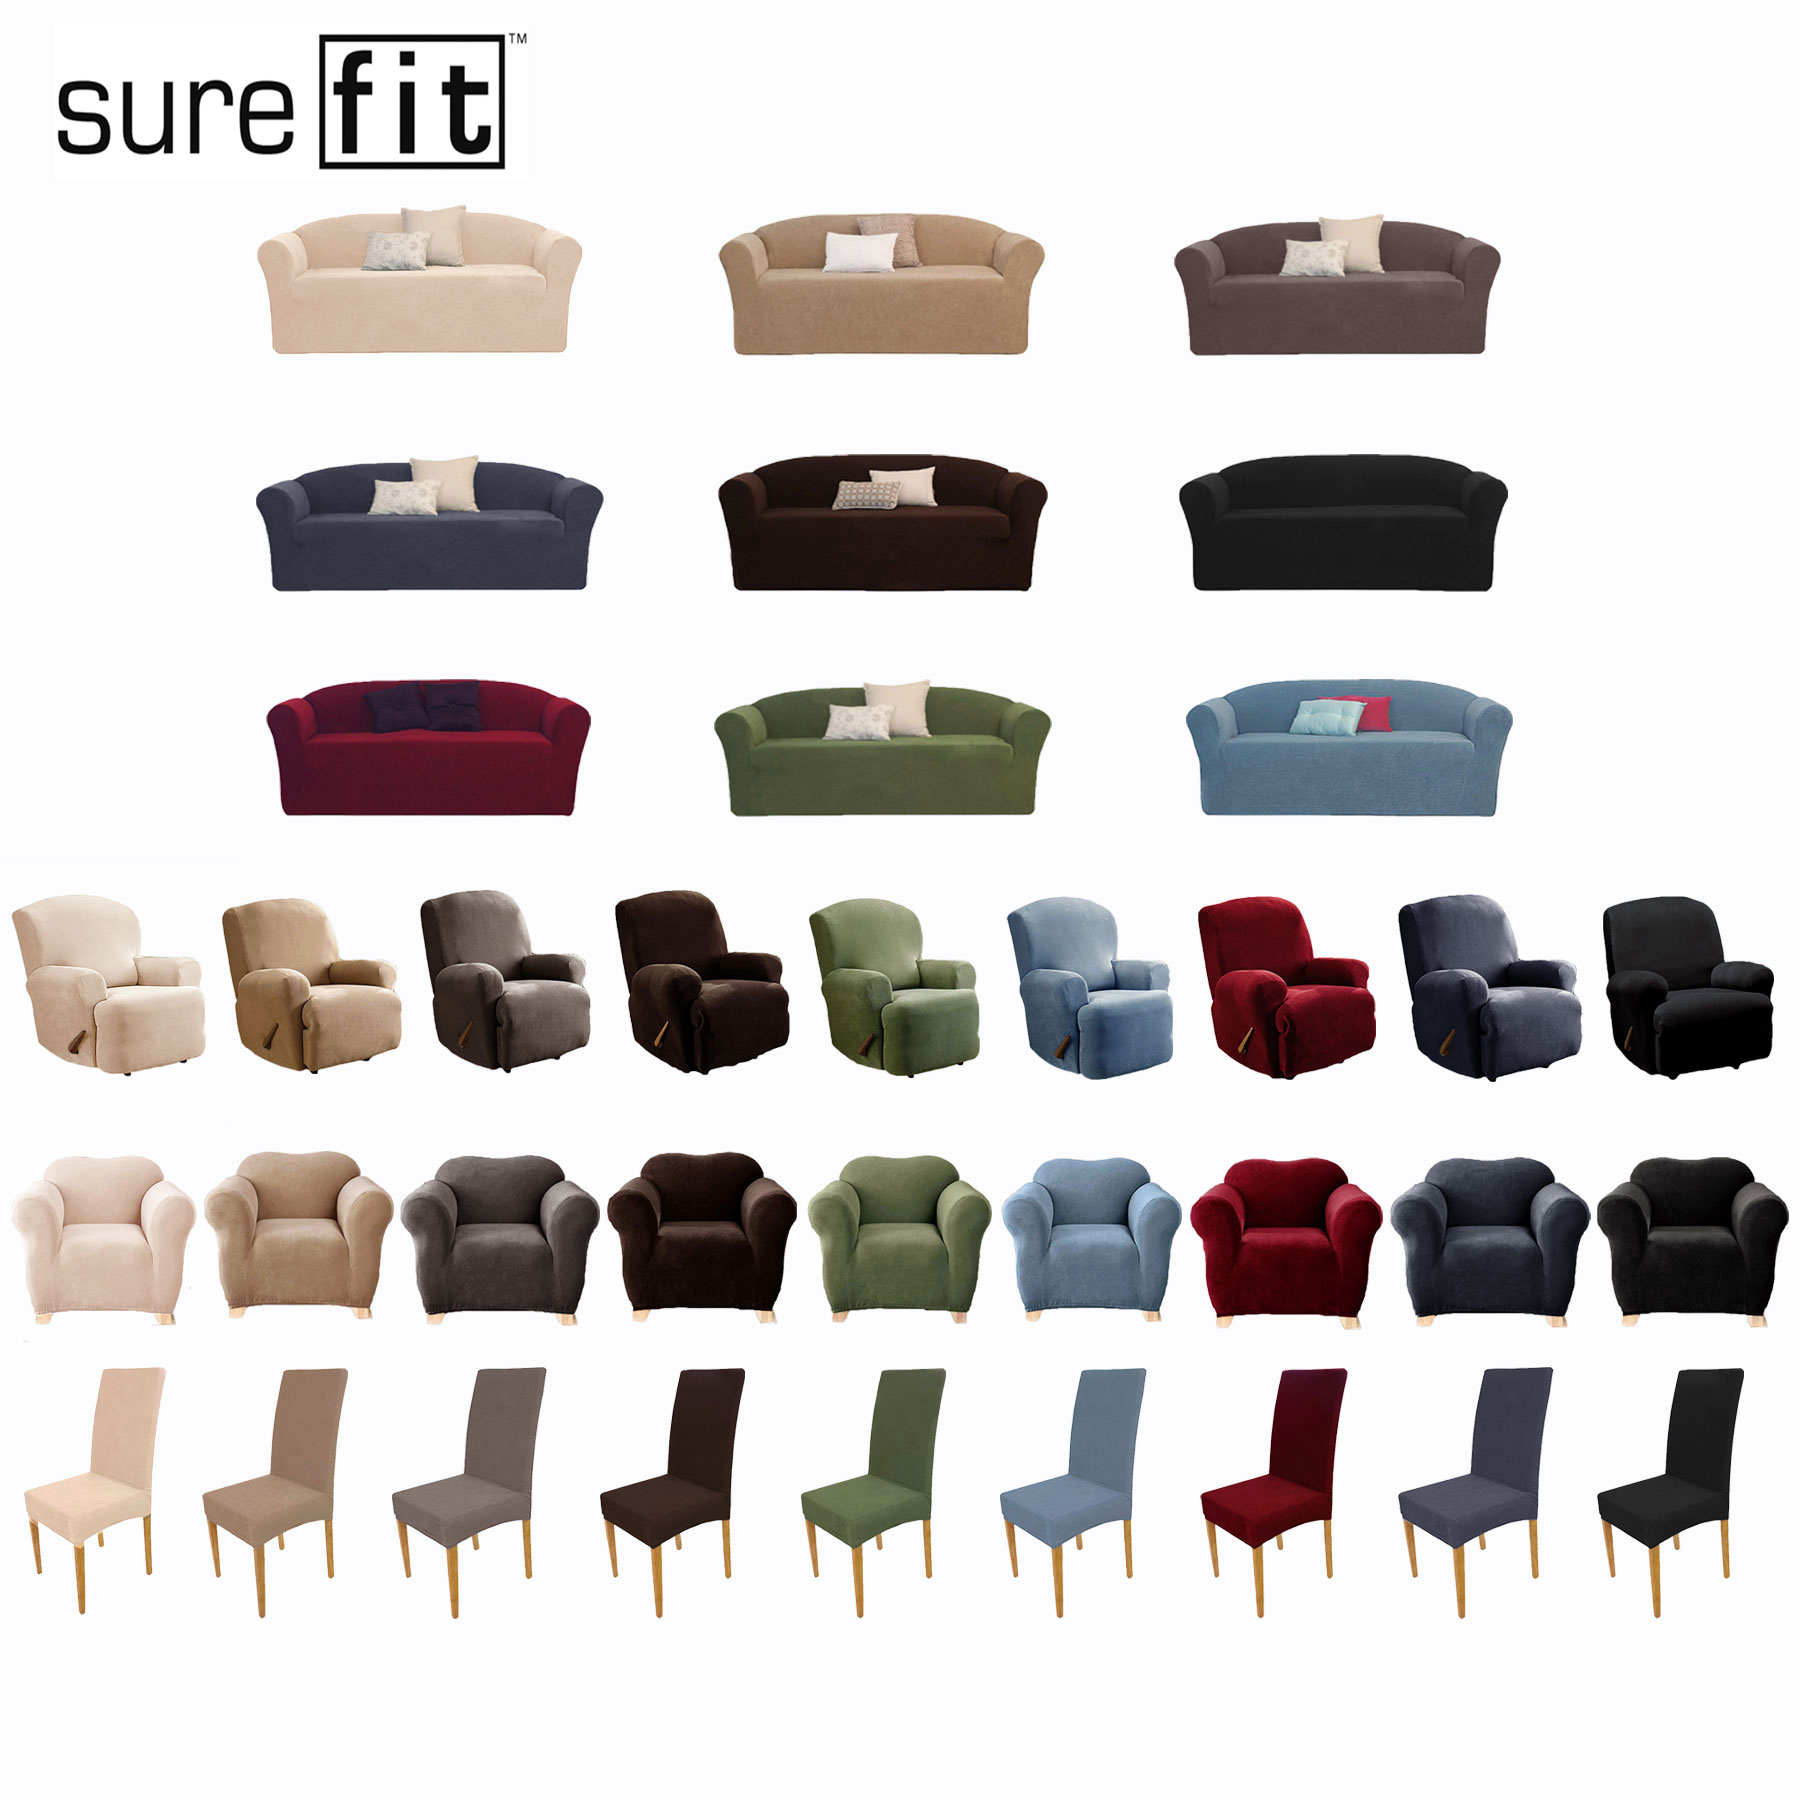 sure fit sofa covers for pets